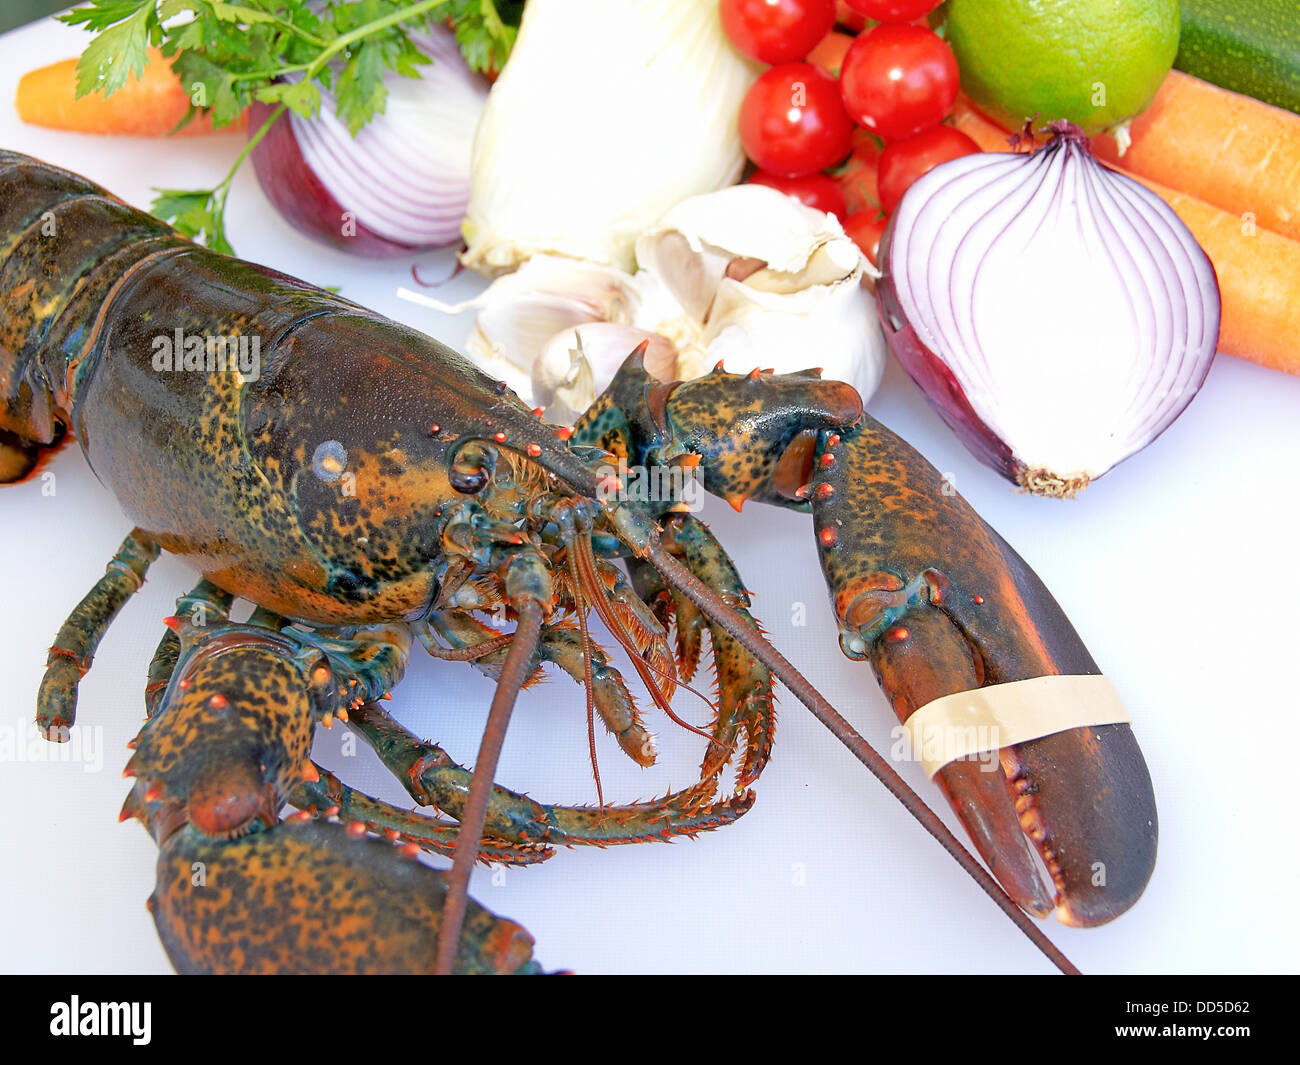 -Lobster and Veggies- Stock Photo